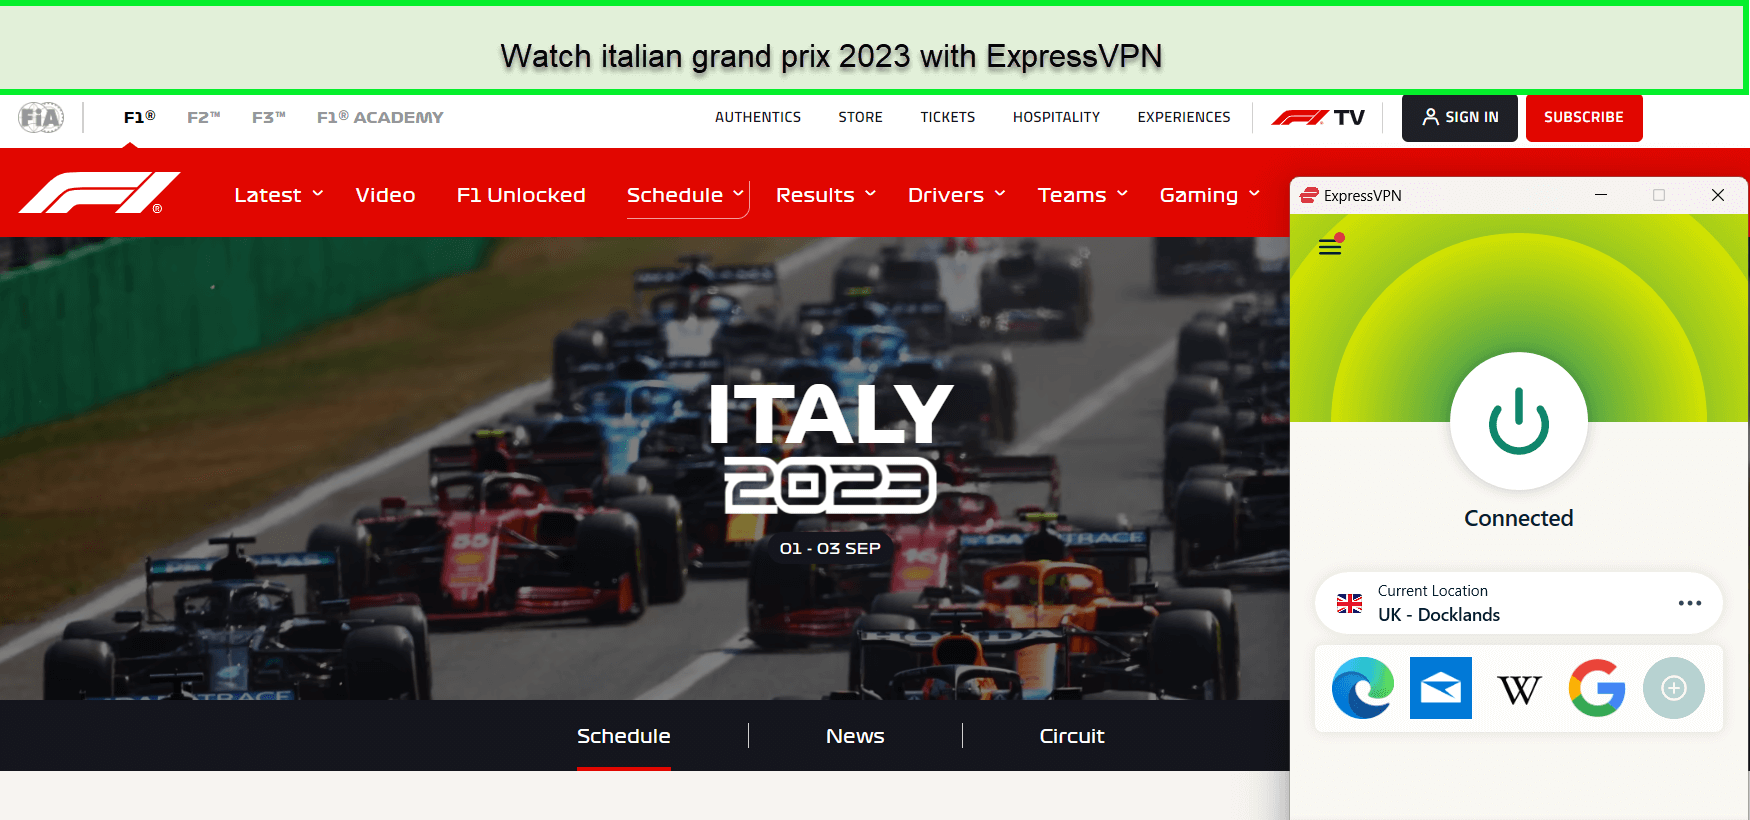 How-to-Watch-Italian-Grand-Prix-2023-in-South Korea-on-ITV-with-ExpressVPN